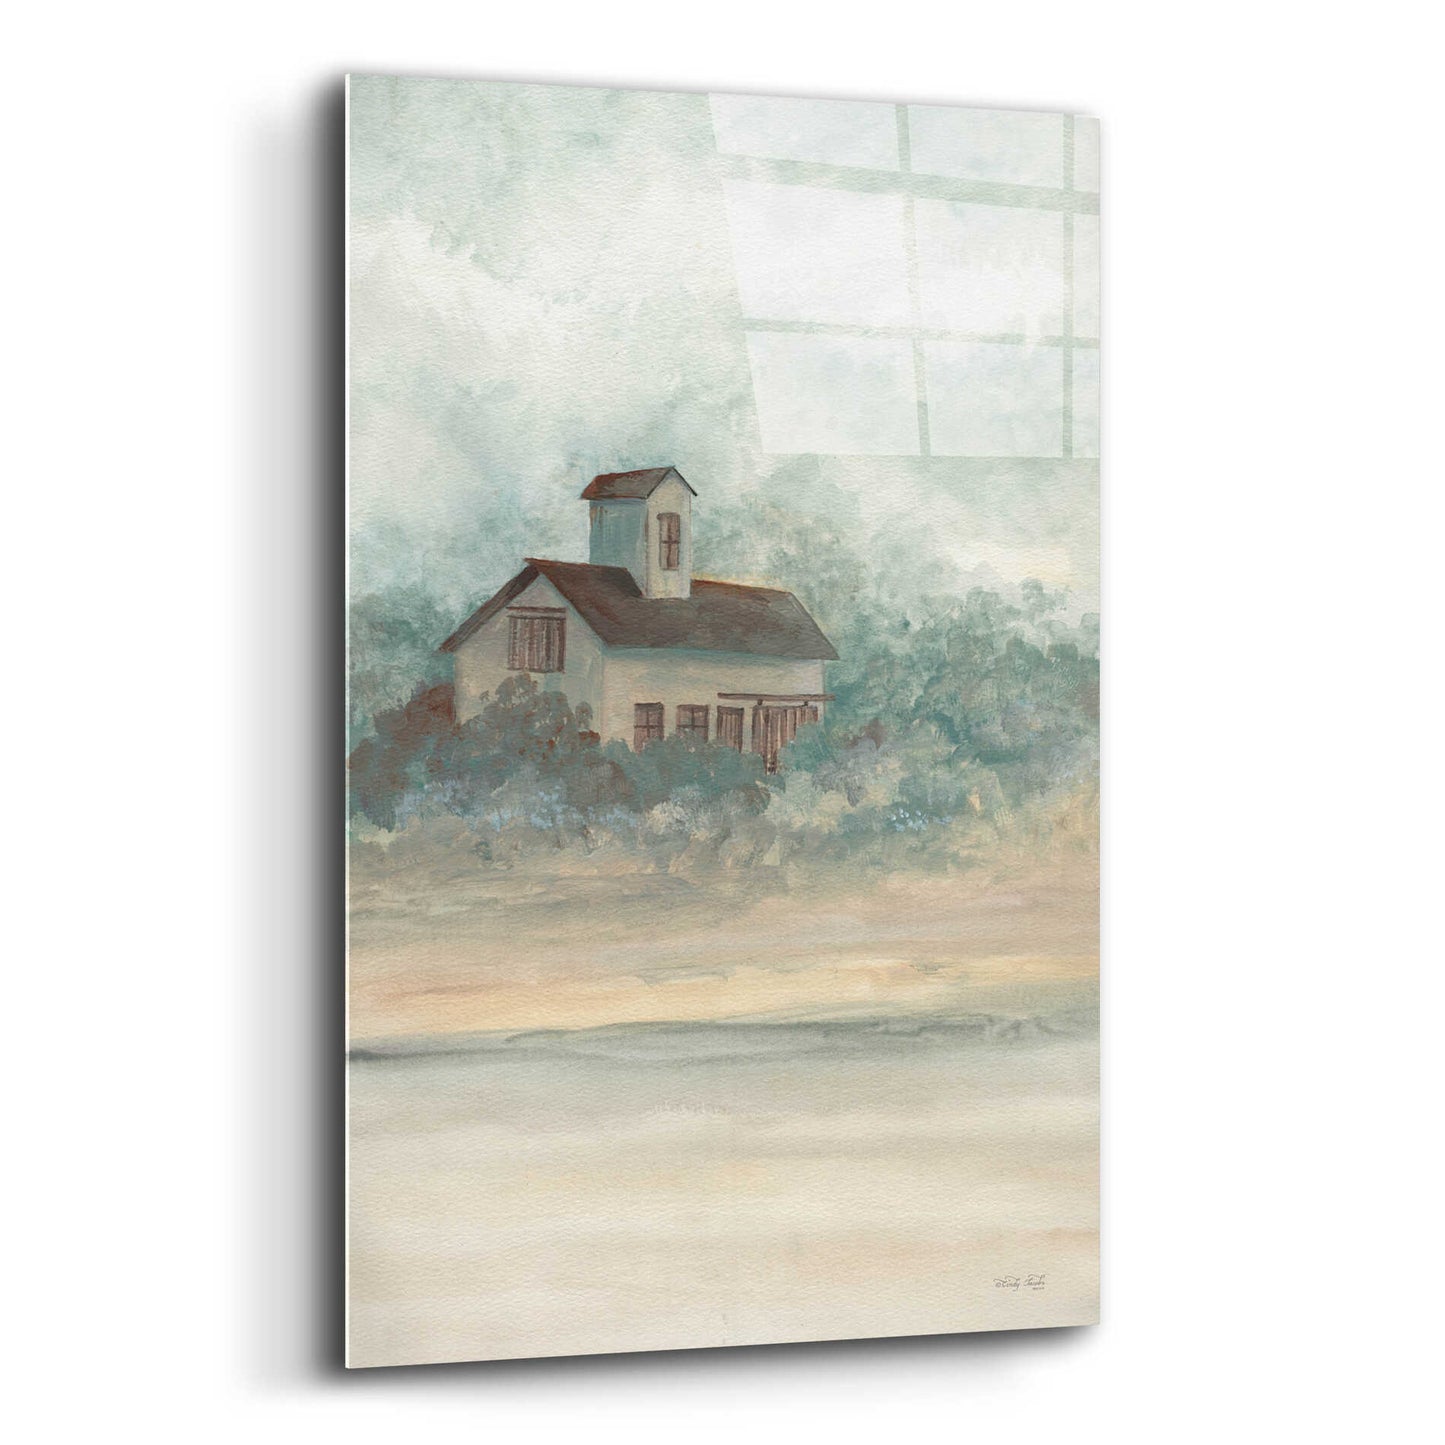 Epic Art 'Barn In Country I' by Cindy Jacobs, Acrylic Glass Wall Art,12x16